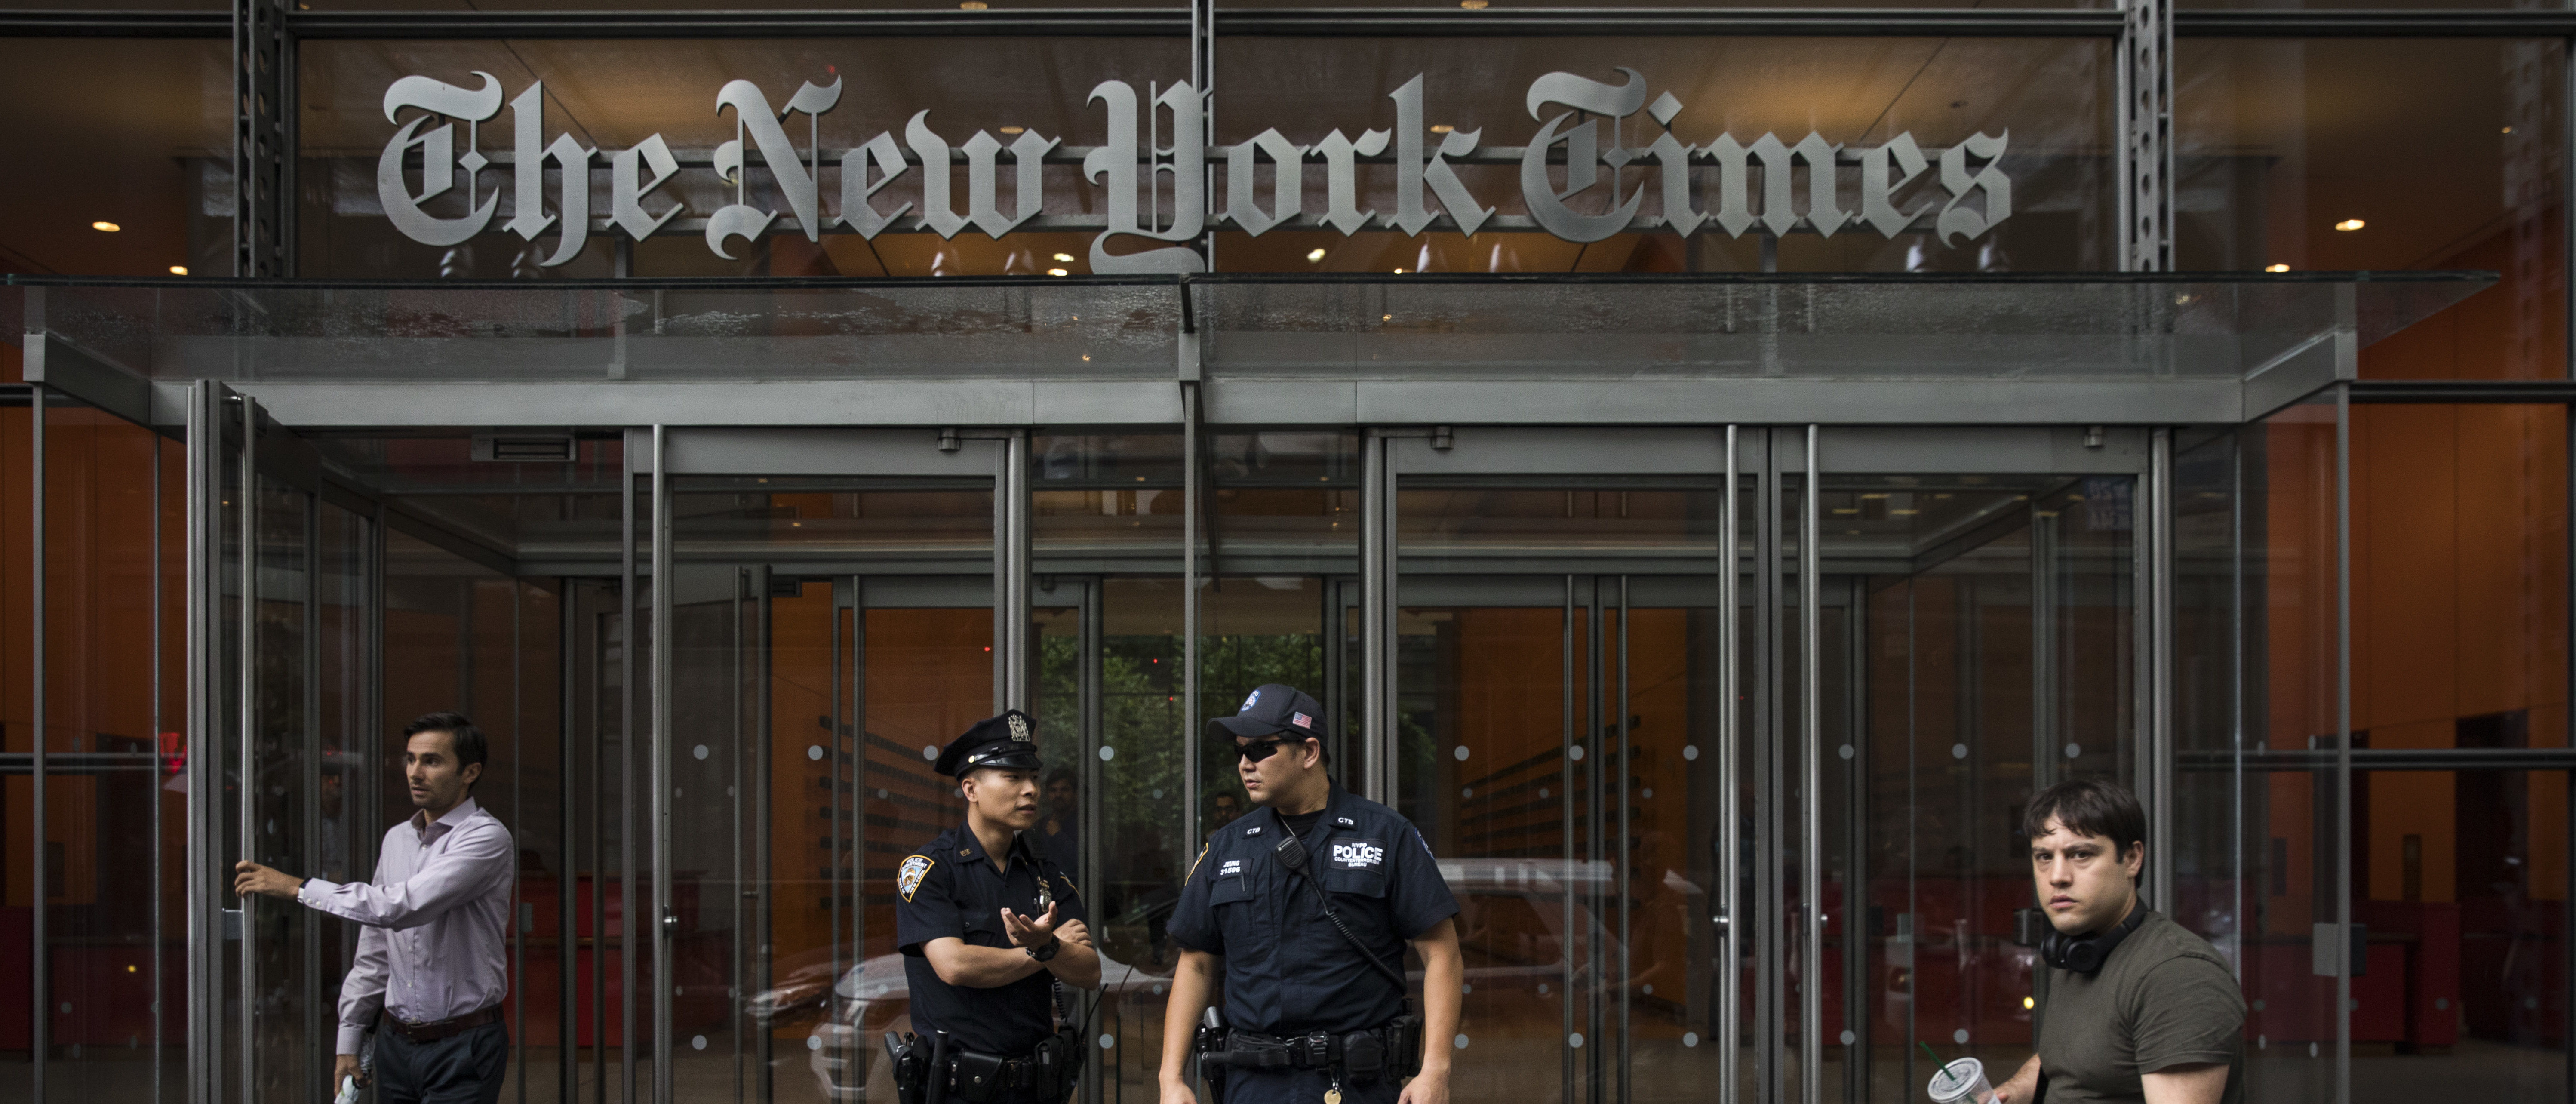 Members of the New York City Police Department stand outside the headquarters of The New York Times, June 28, 2018 in New York City. (Drew Angerer/Getty Images)